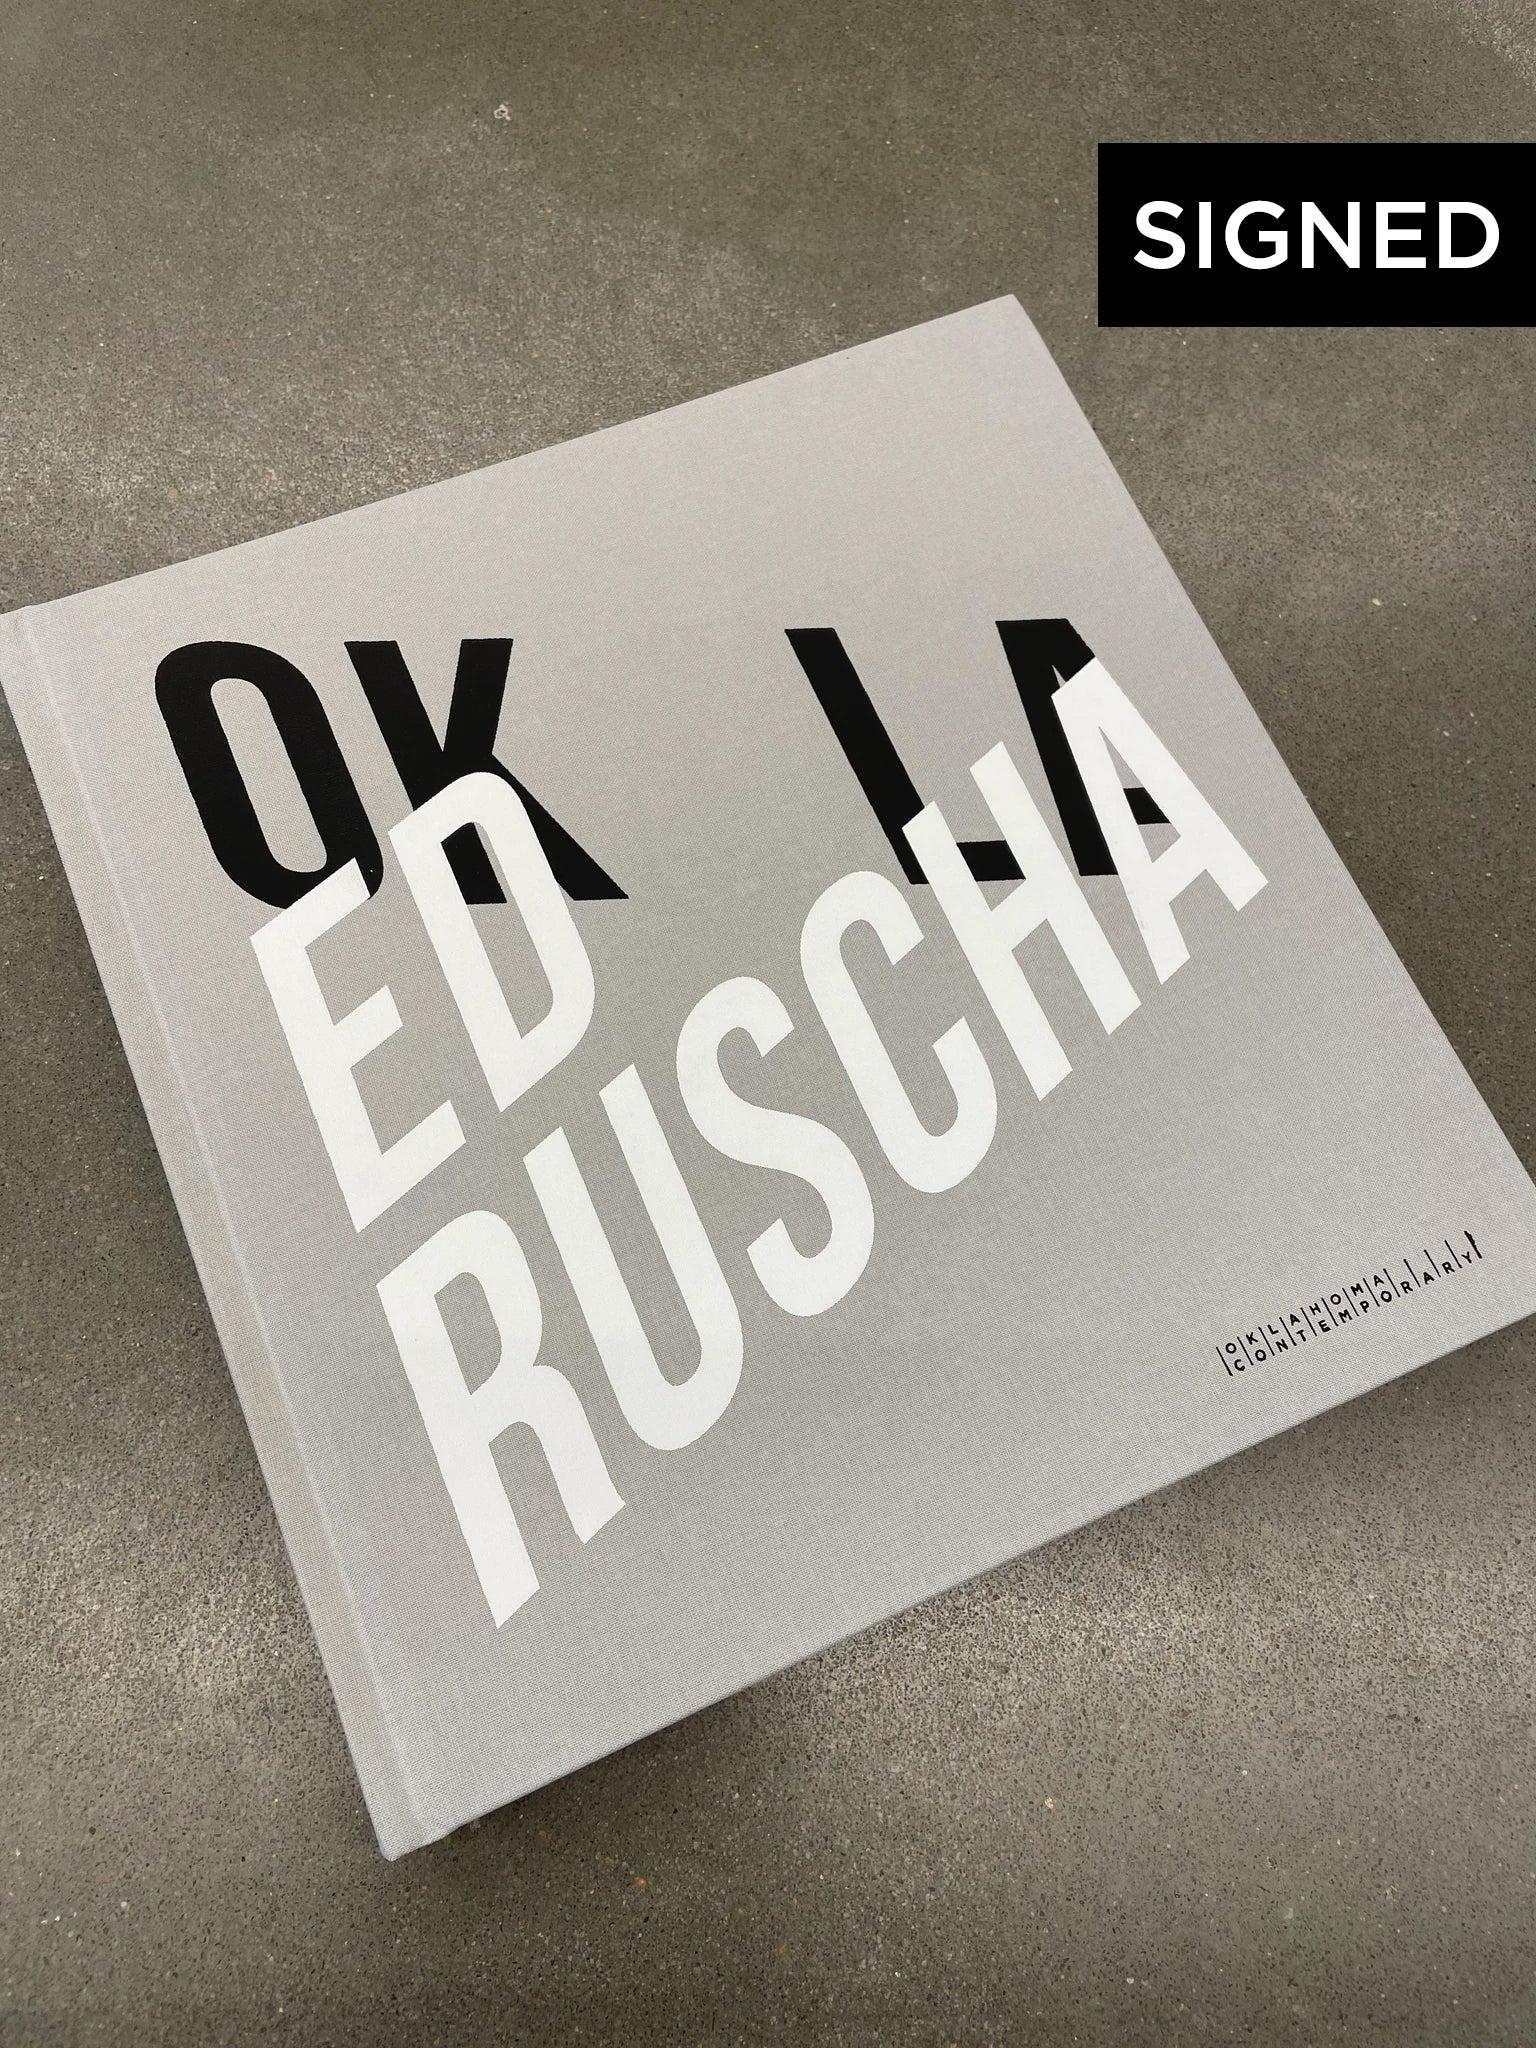 OKLA 2021 Catalog:

Limited edition of 100 copies signed by artist Ed Ruscha

This fully illustrated catalogue documents the landmark exhibition as installed at Oklahoma Contemporary. Featuring photography of all works in the landmark exhibition,